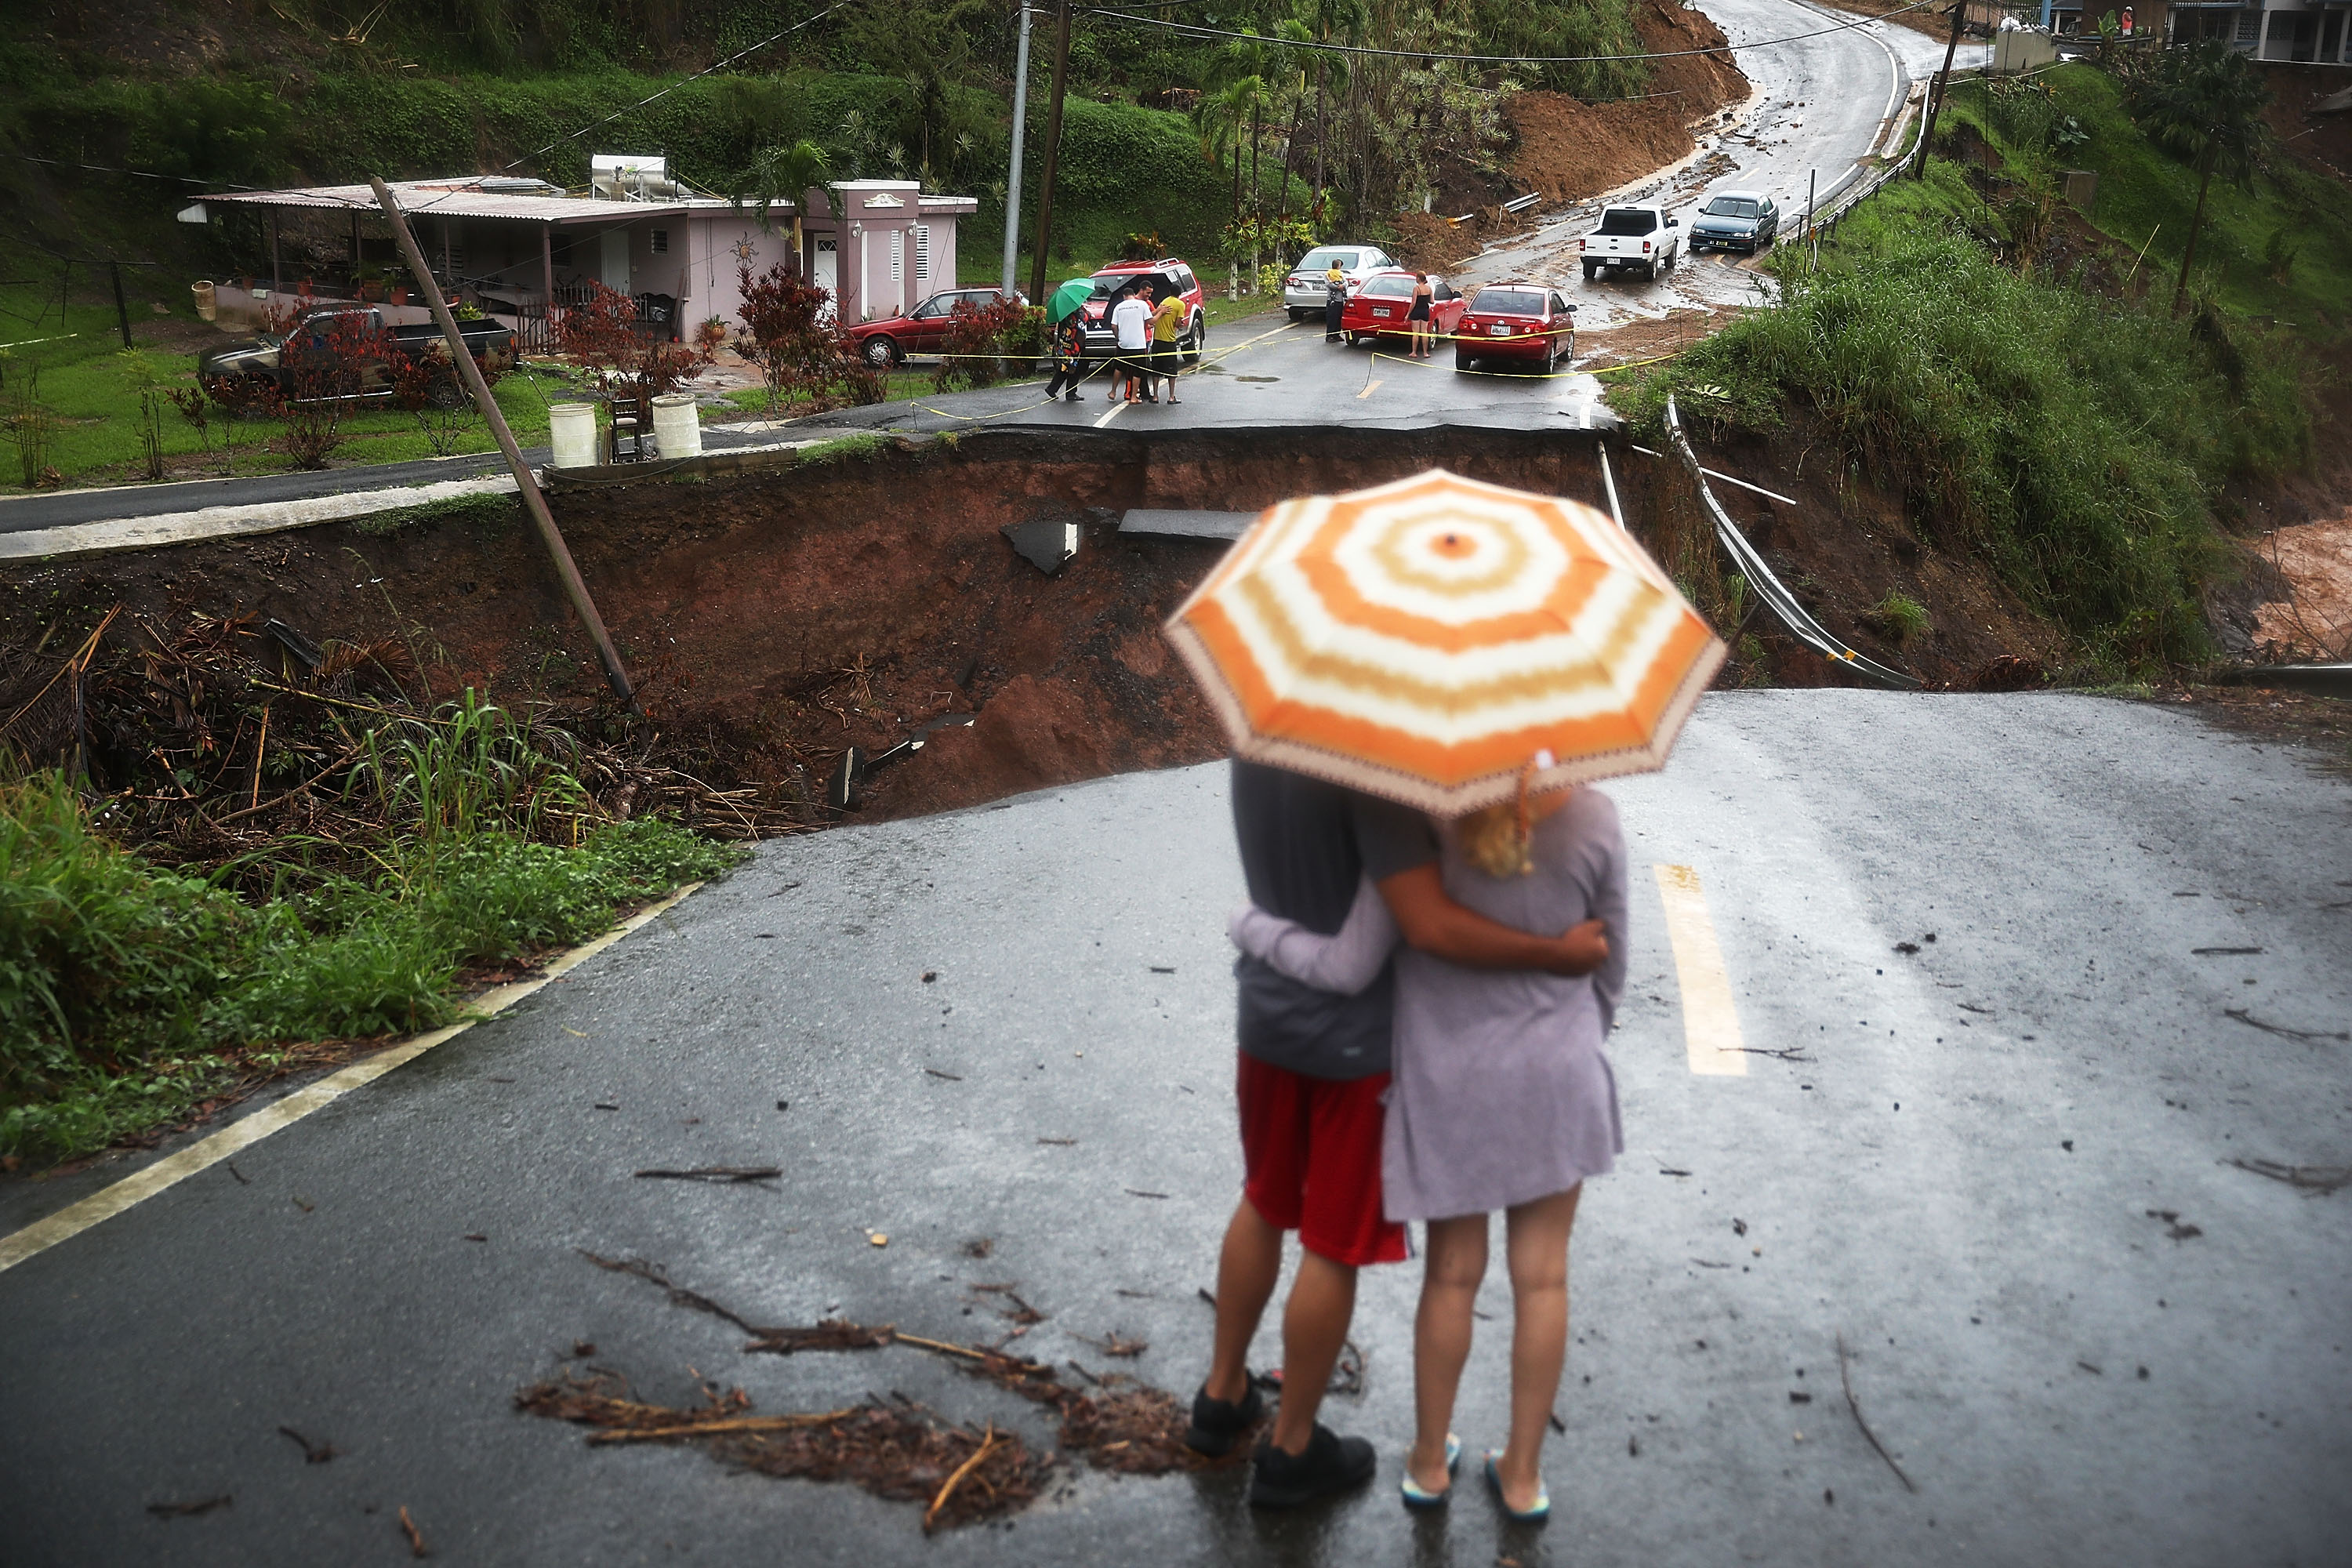 People look at a collapsed road after Hurricane Maria swept through Puerto Rico. (Joe Raedle&mdash;Getty Images)